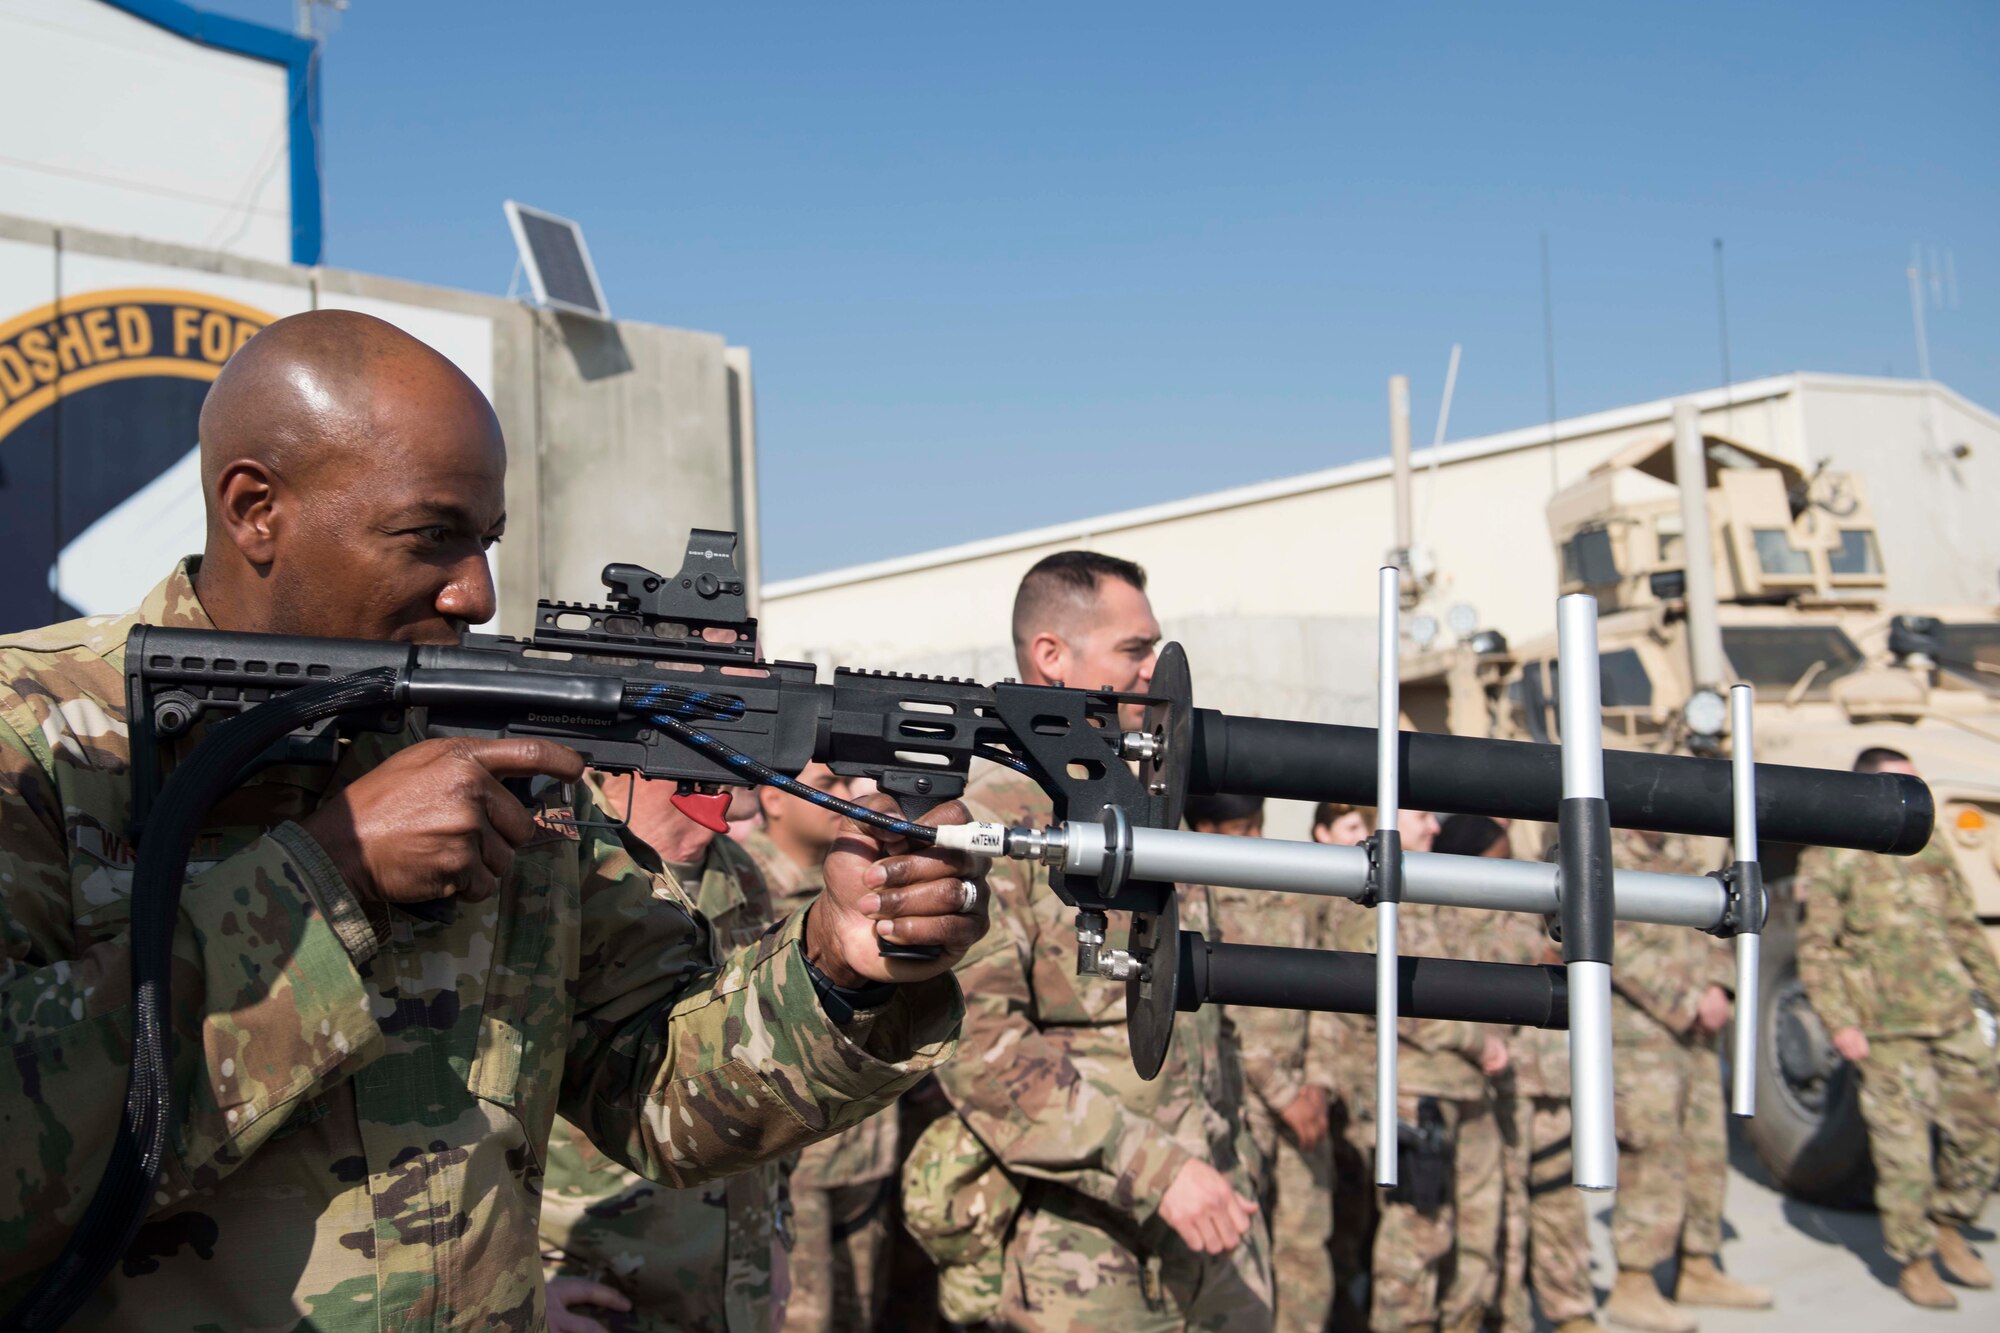 Chief Master Sgt. of the Air Force Kaleth O. Wright gets a hands-on demonstration of a counter-unmanned aircraft system known as a 'Drone Defender' during a visit with the 455th Expeditionary Security Forces Squadron at Bagram Airfield, Afghanistan, Dec. 25, 2018. Wright and Air Force Chief of Staff Gen. David L. Goldfein spoke about the “Year of the Defender” and some changes security forces Airmen will see during training exercises. (U.S. Air Force photo by Senior Airman Kaylee Dubois)